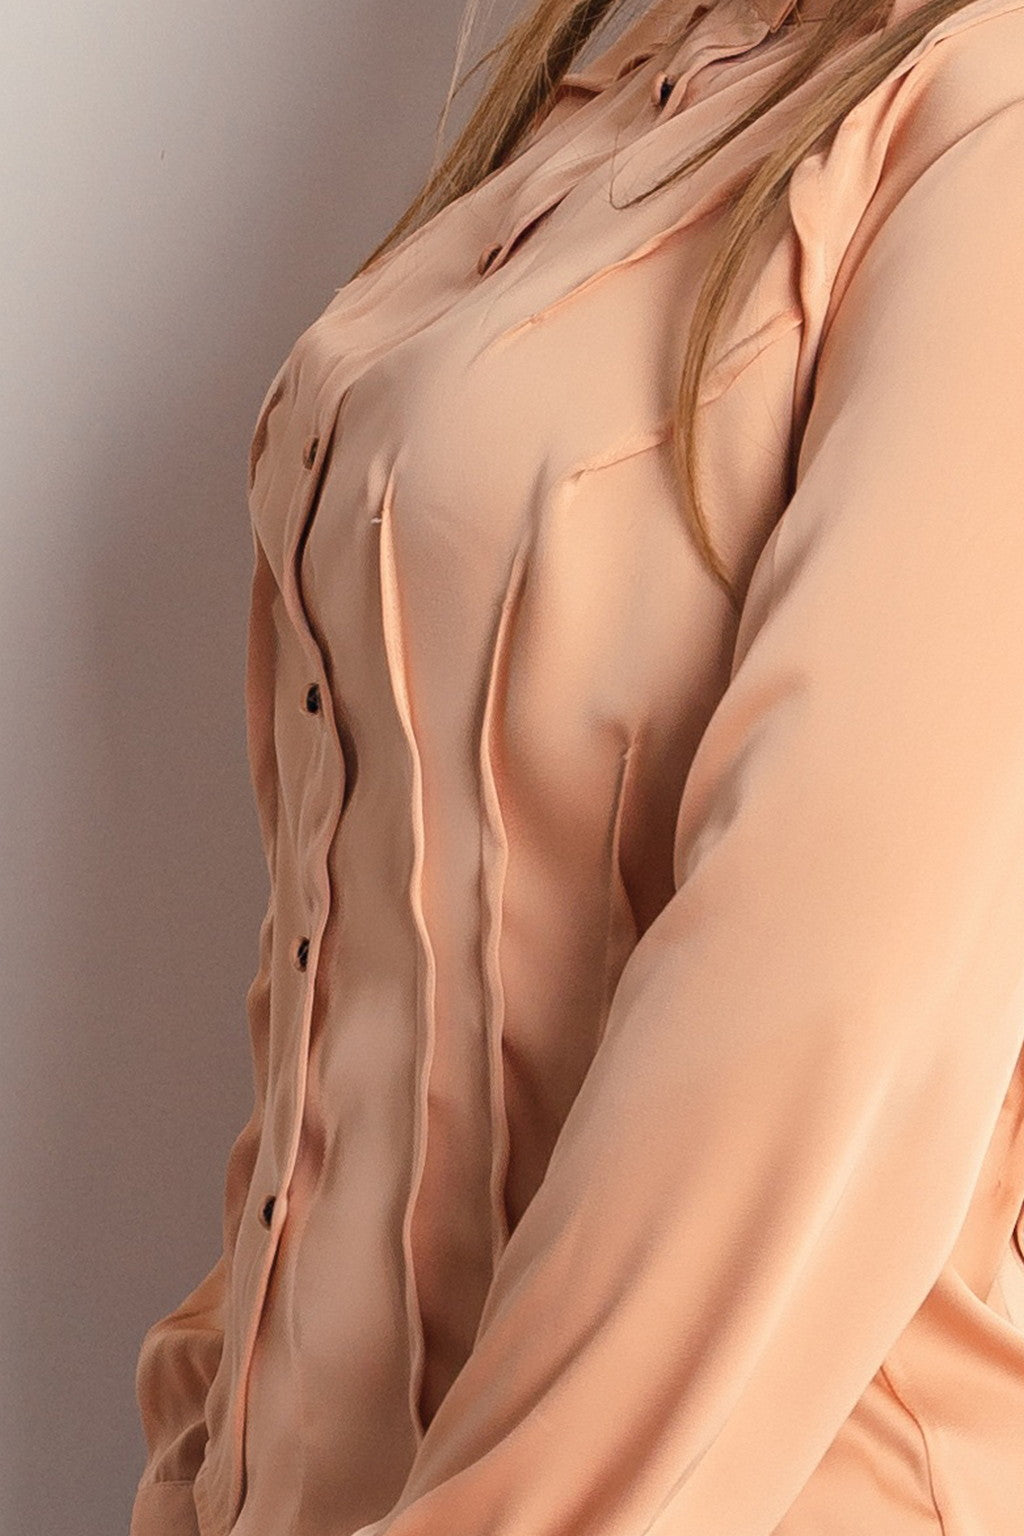 Structured Shirt " St.Pancars "Architectural Shirt In Peach Colour - side zoomed